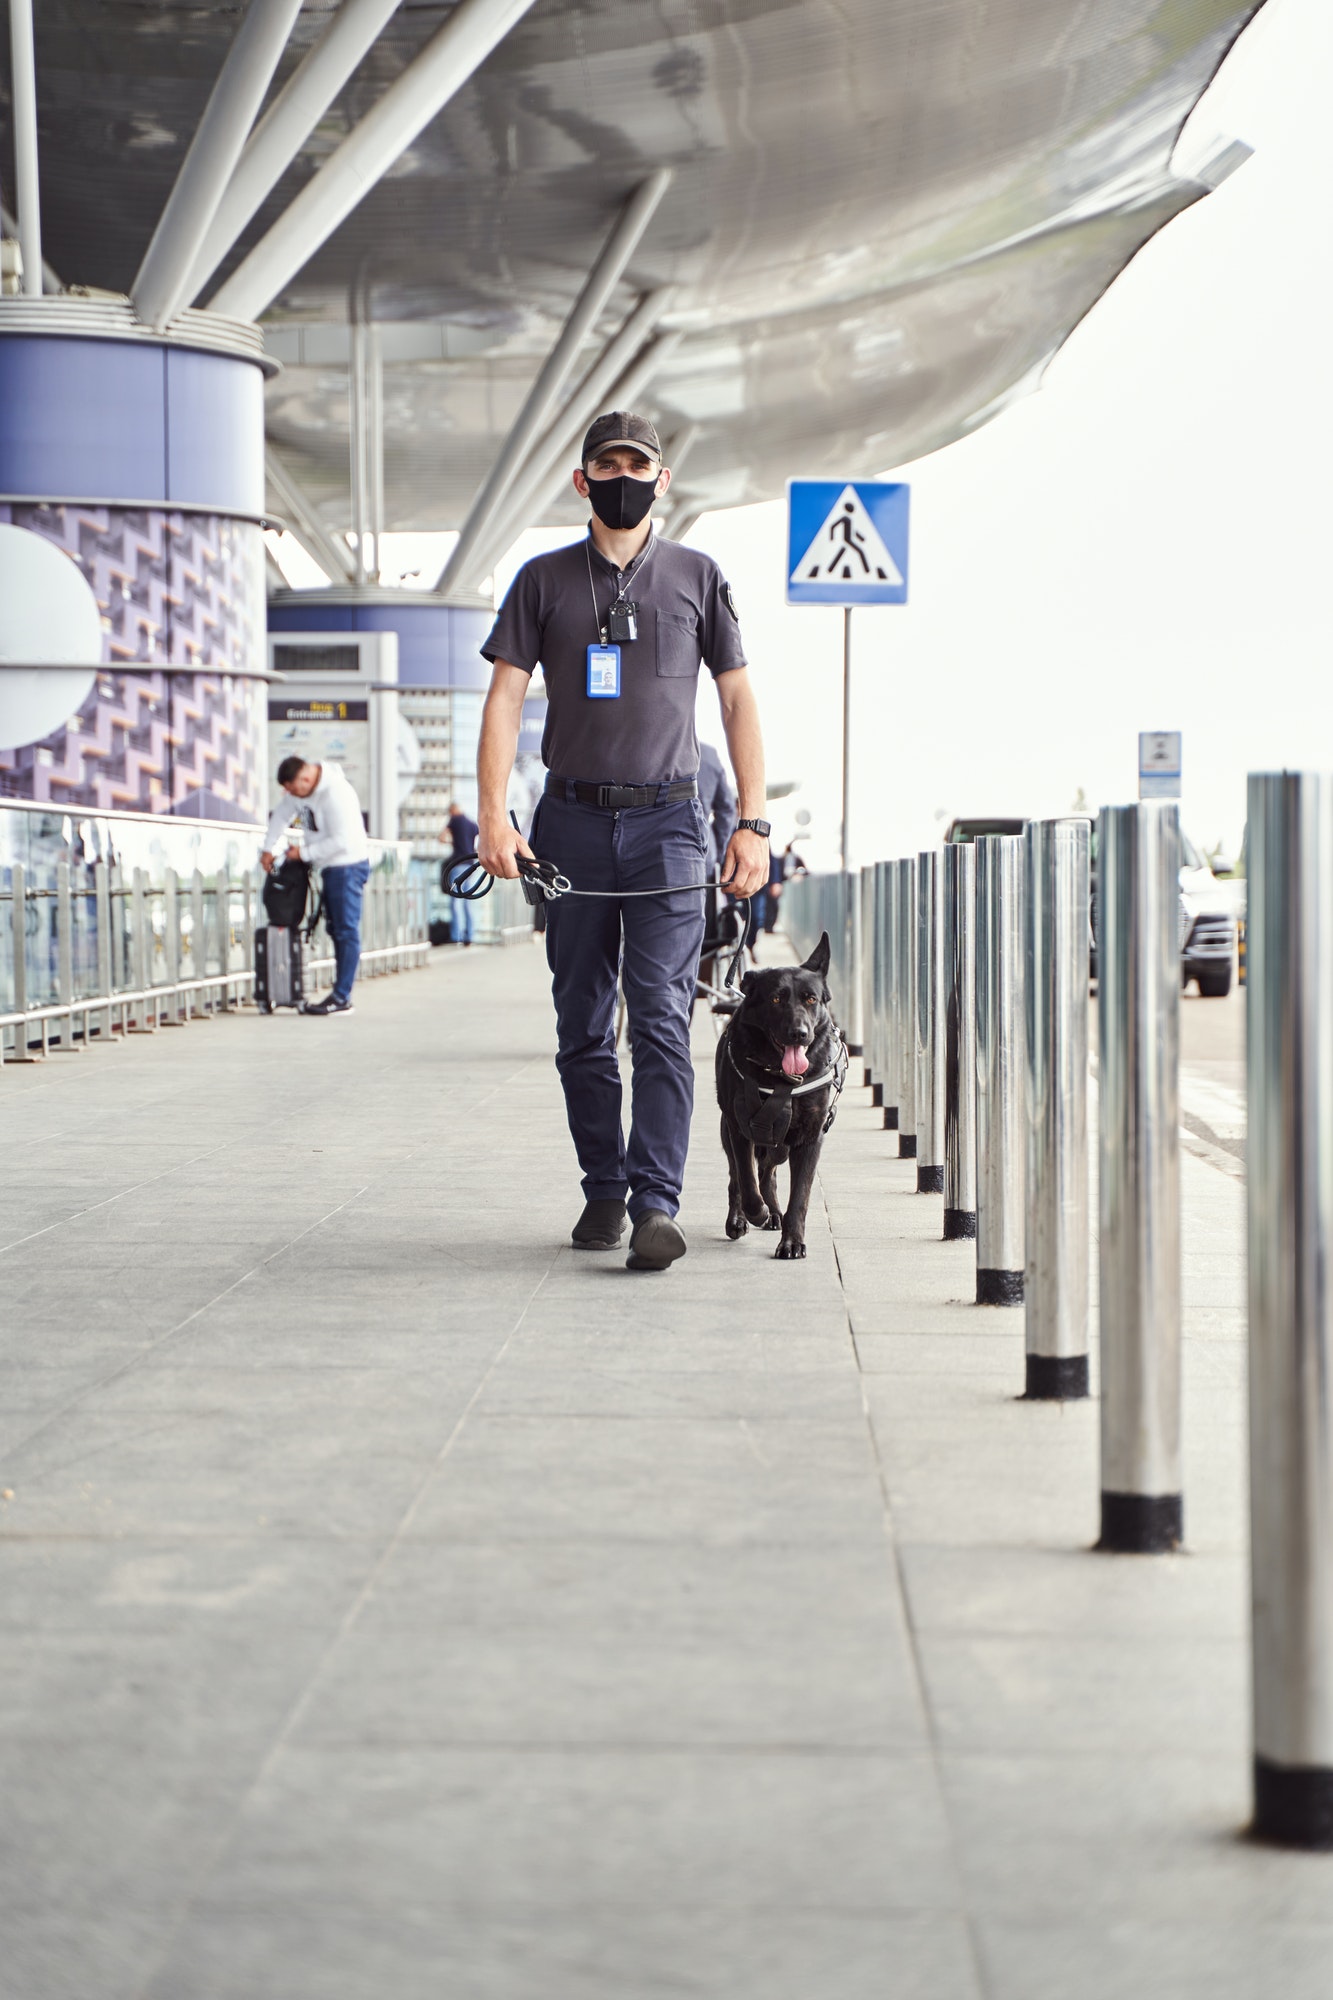 Security worker with detection dog walking outdoors at airport